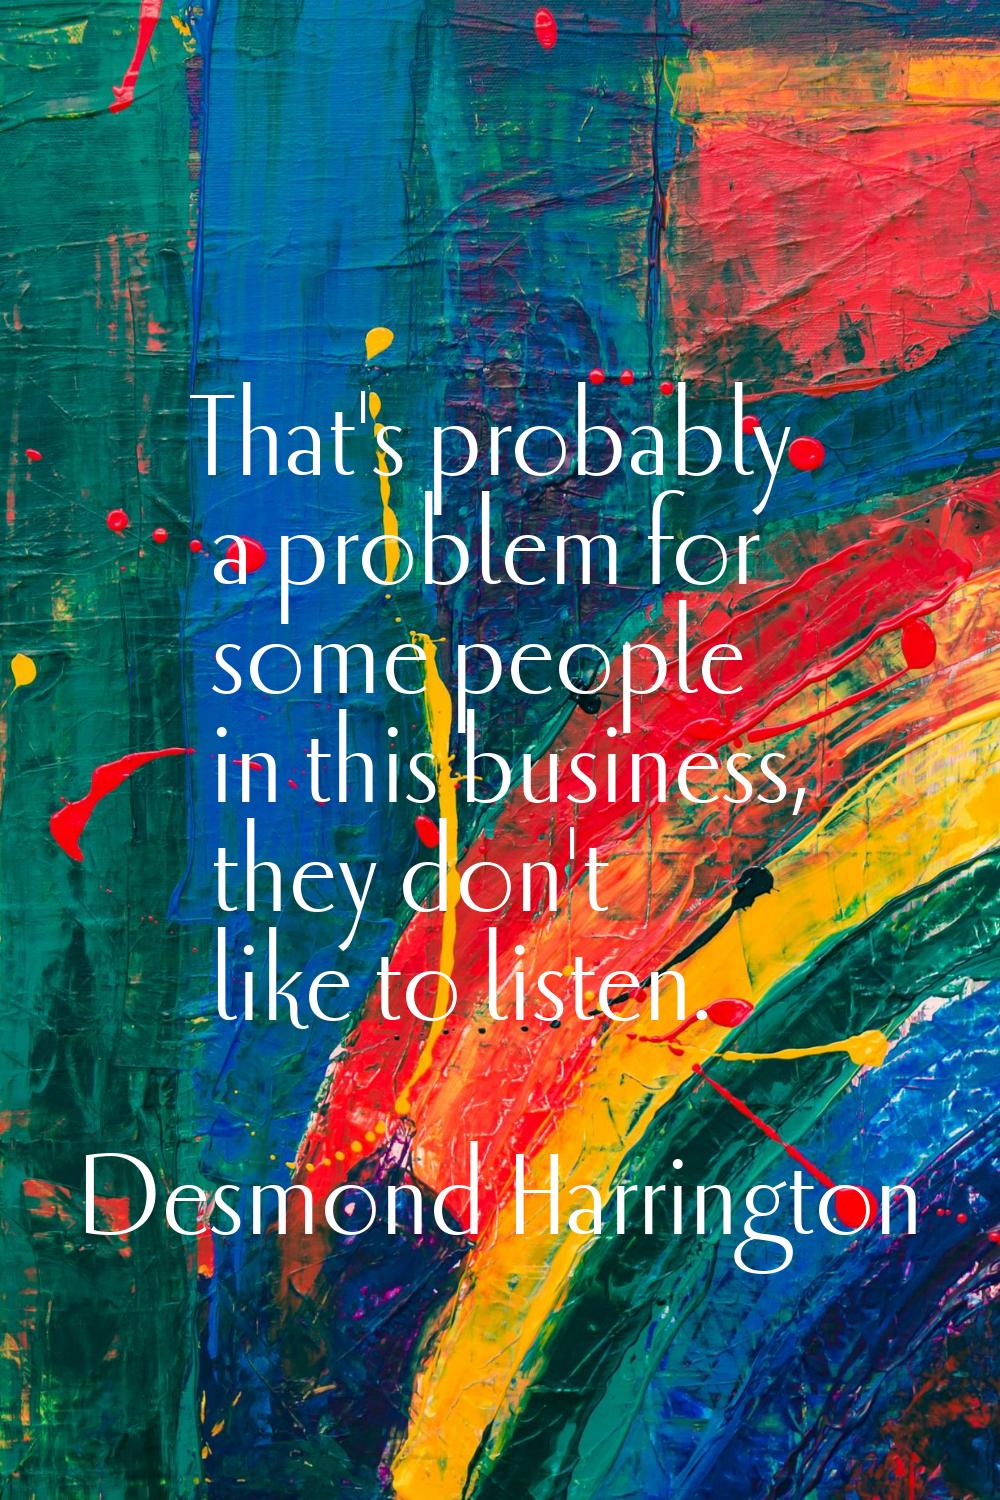 That's probably a problem for some people in this business, they don't like to listen.